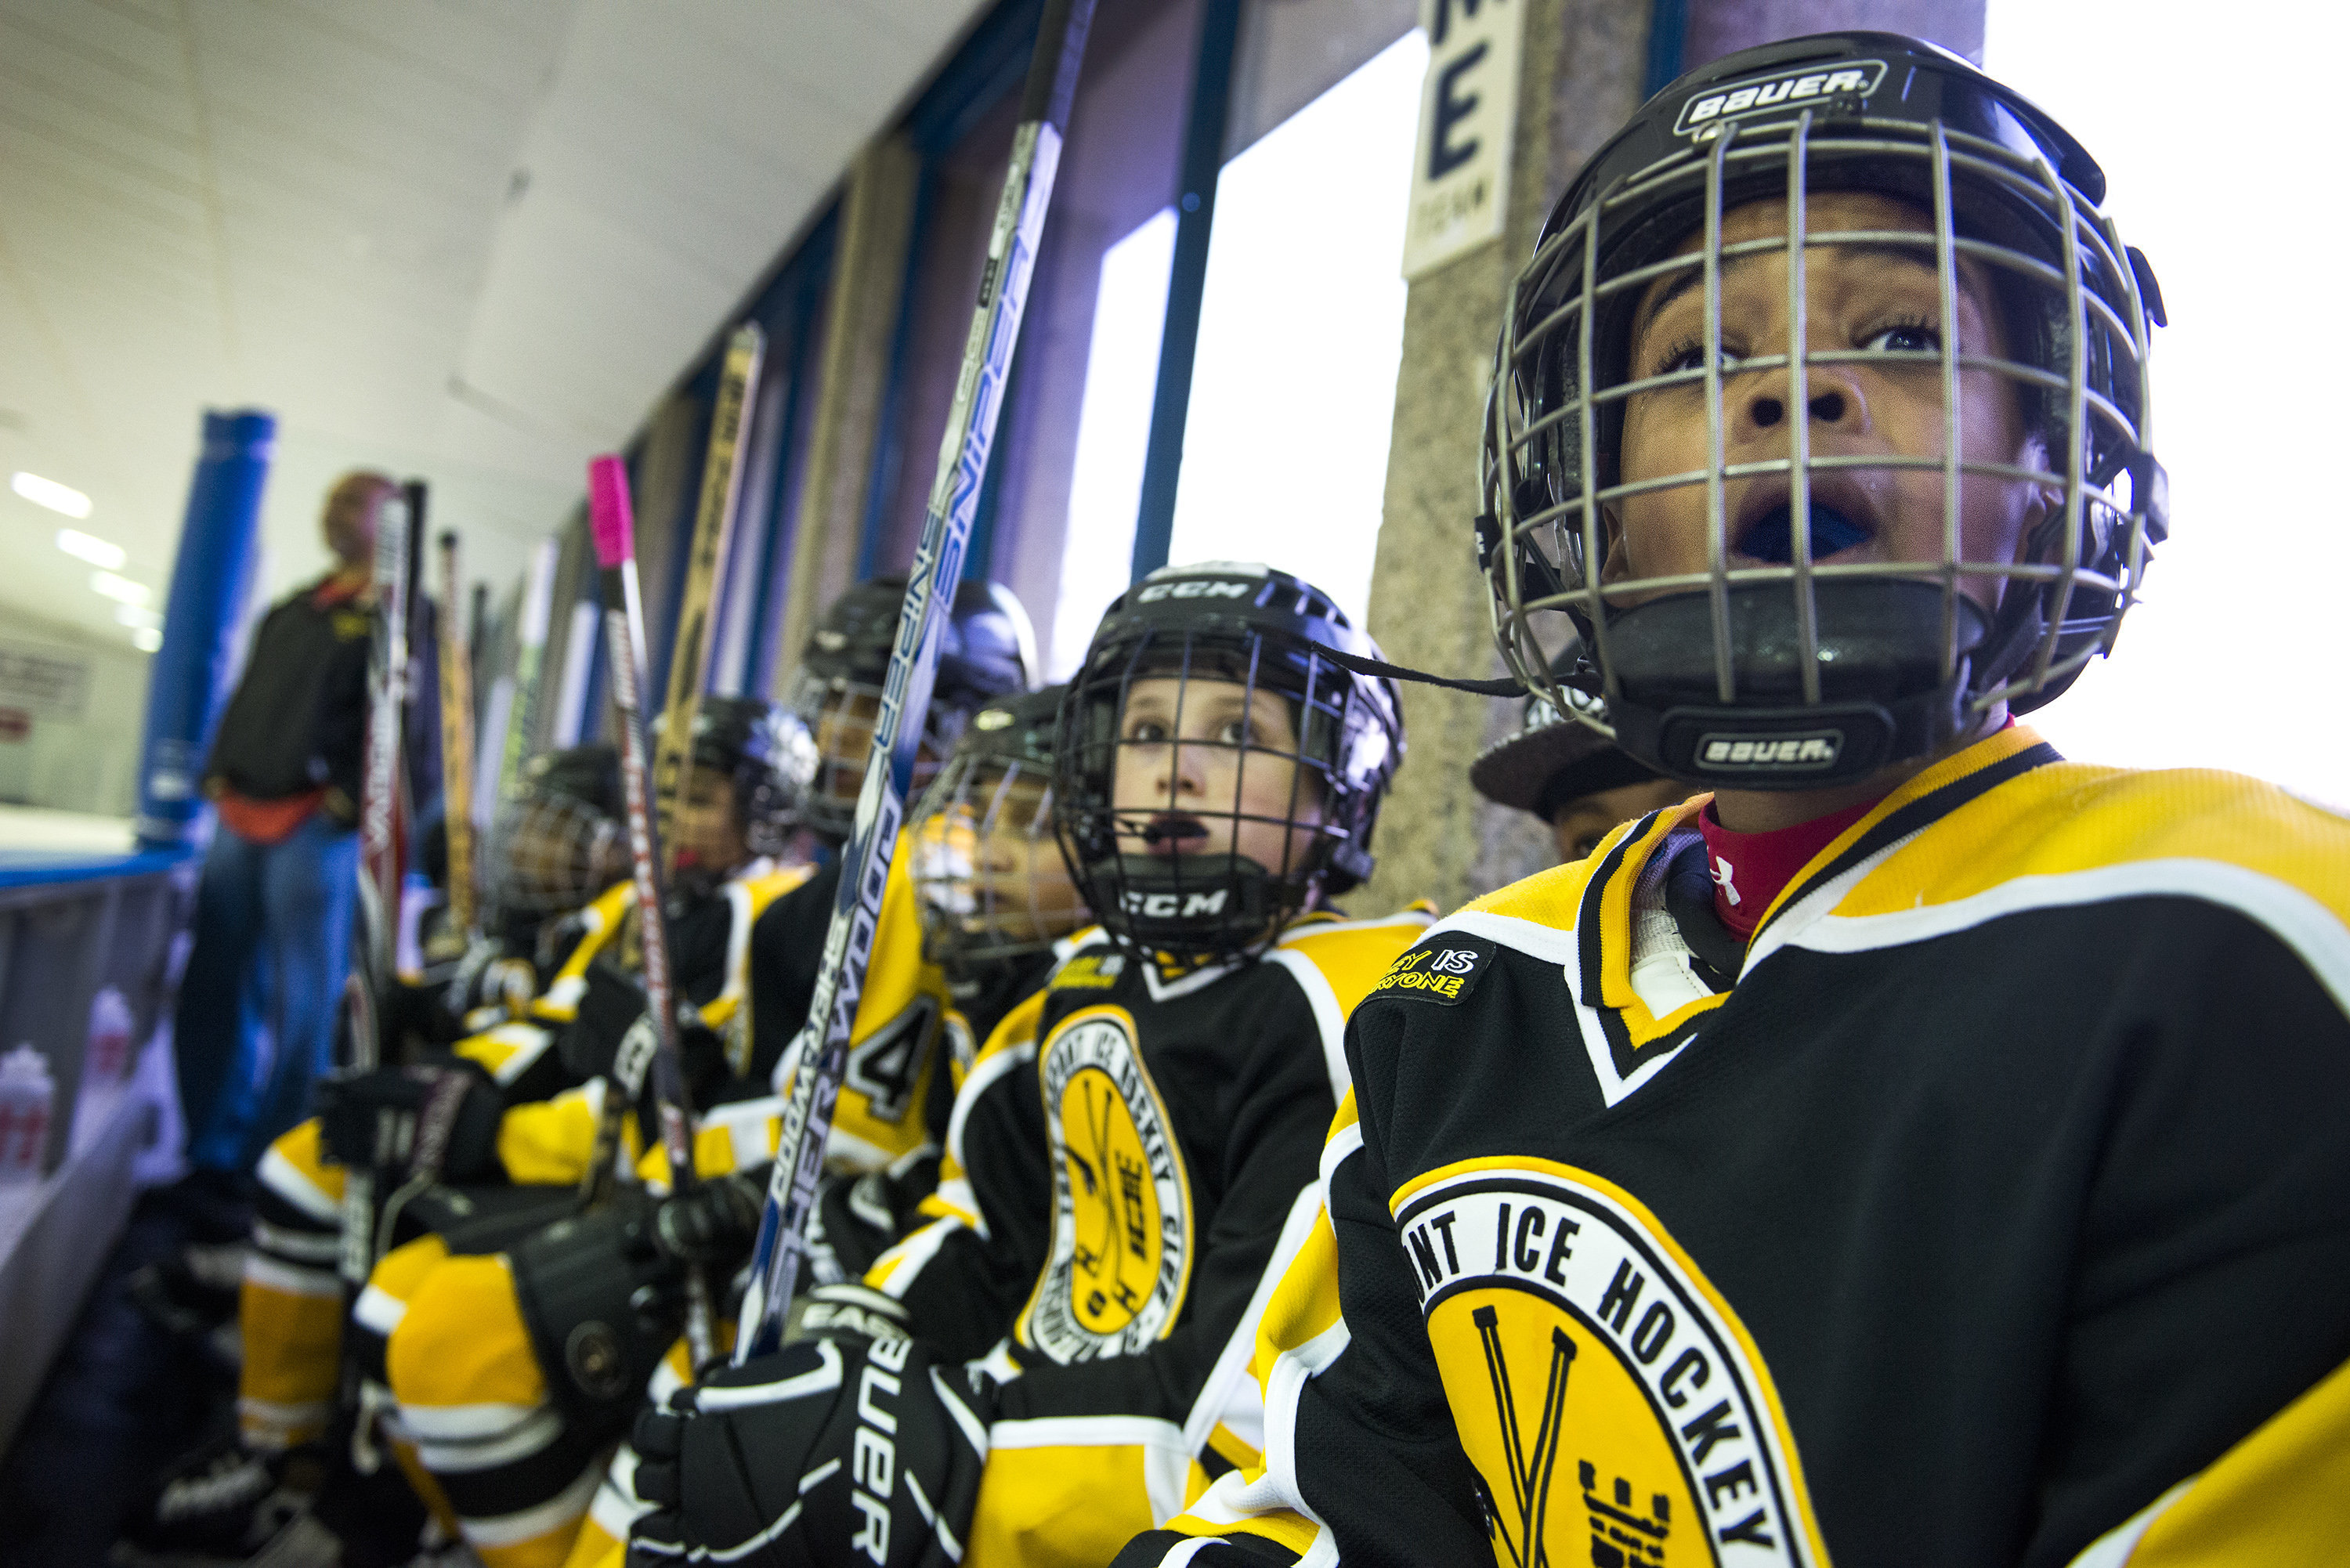 What A Mostly Black Hockey Club For Kids Tells Us About The Sports Future HuffPost Sports